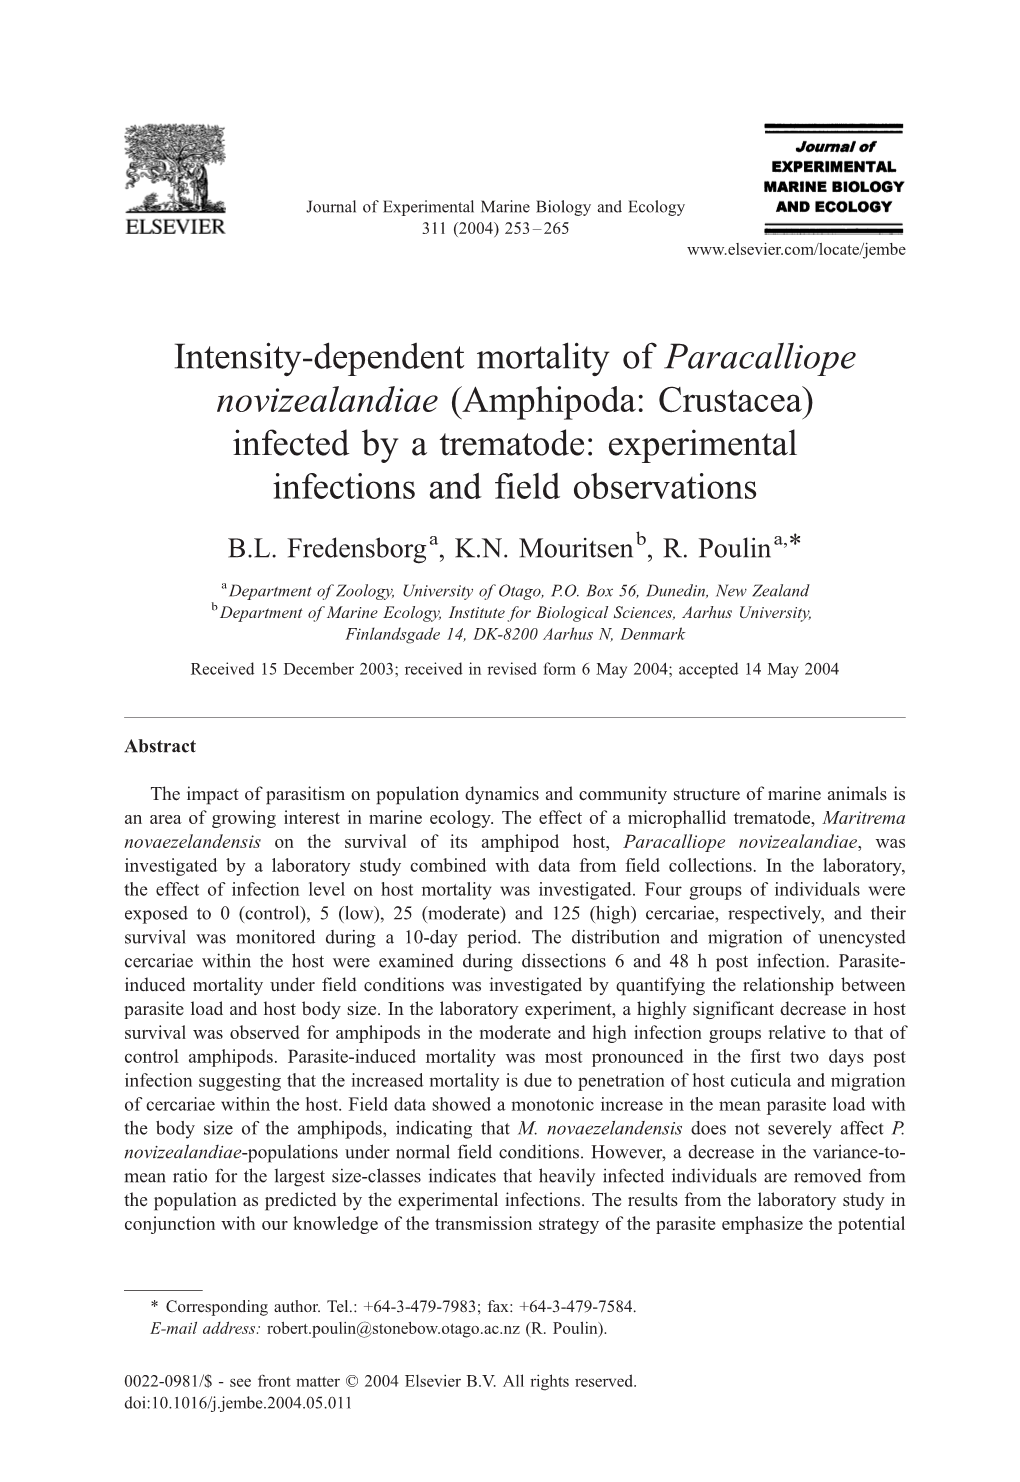 Intensity-Dependent Mortality of Paracalliope Novizealandiae (Amphipoda: Crustacea) Infected by a Trematode: Experimental Infections and Field Observations